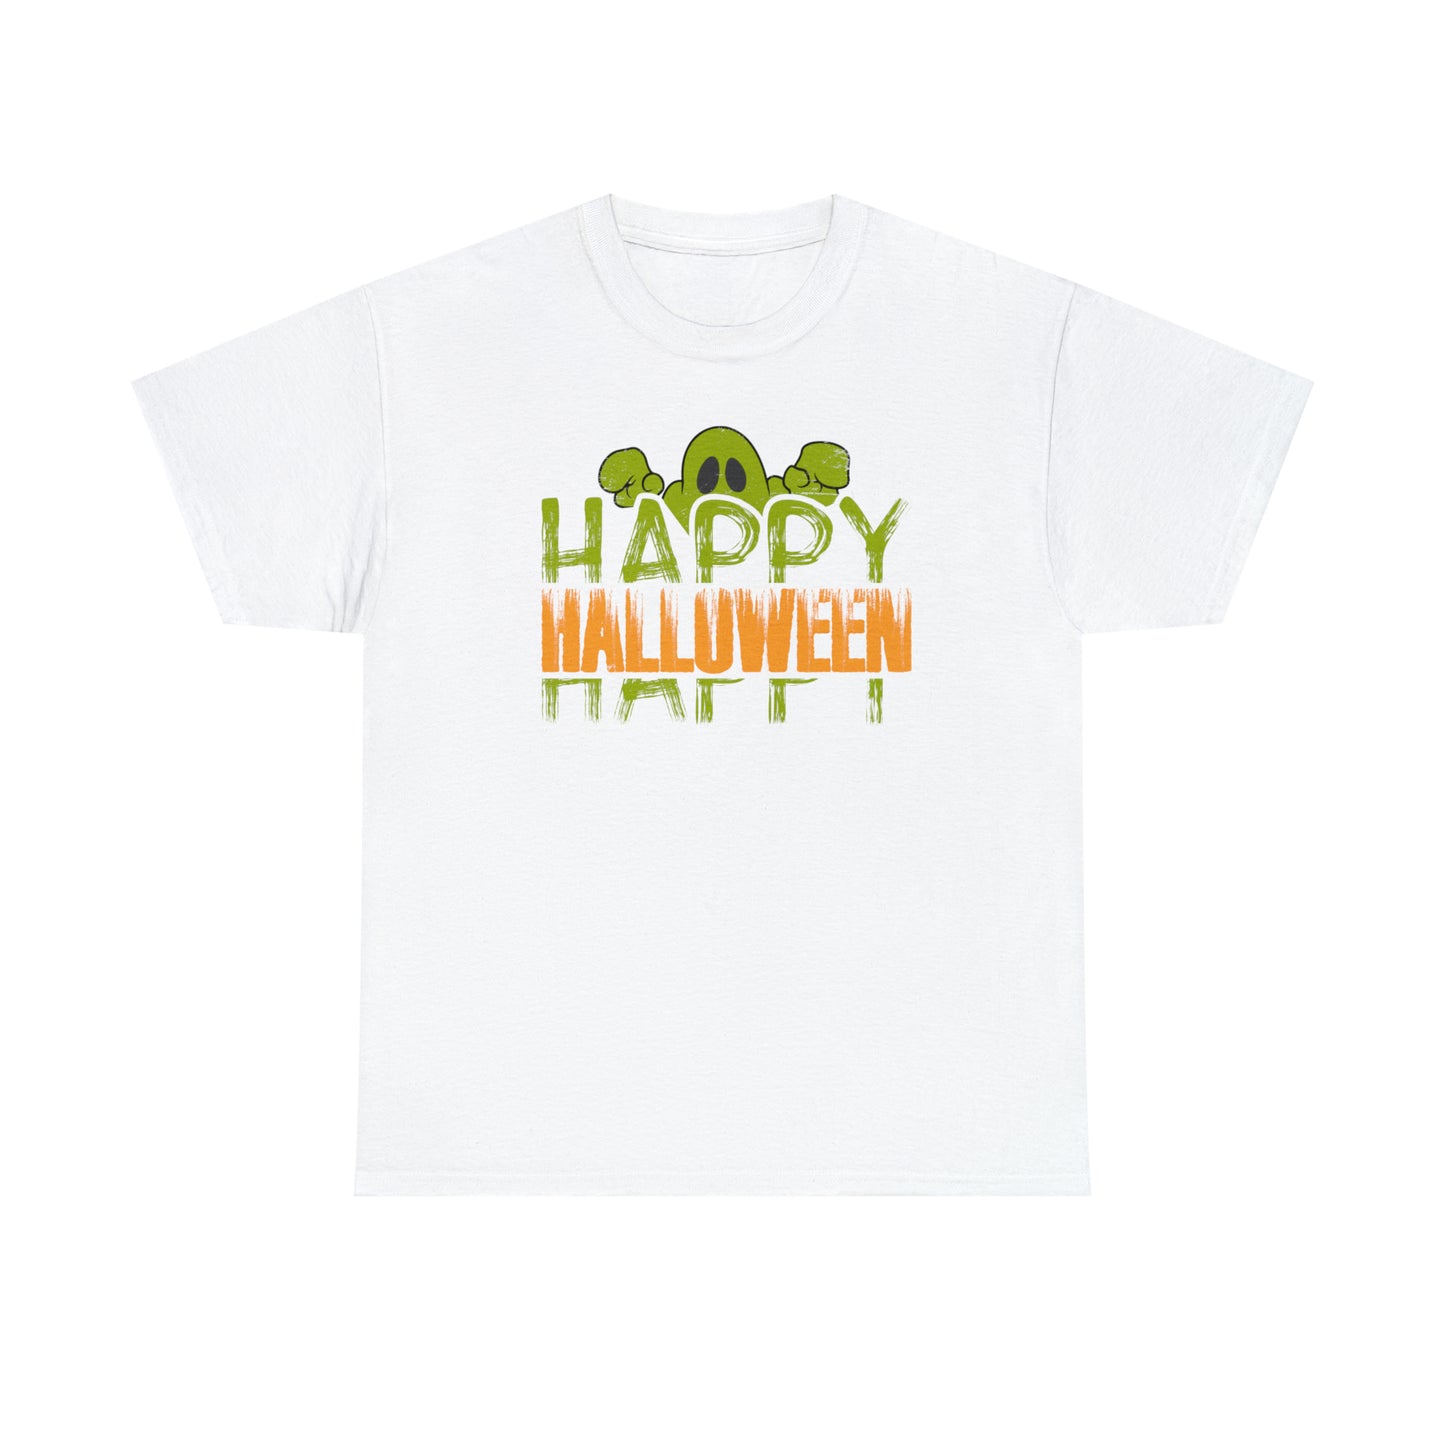 Ghost T-Shirt For Halloween T Shirt For Spooky TShirt For Trick Or Treating Shirt For All Hallows Eve Costume